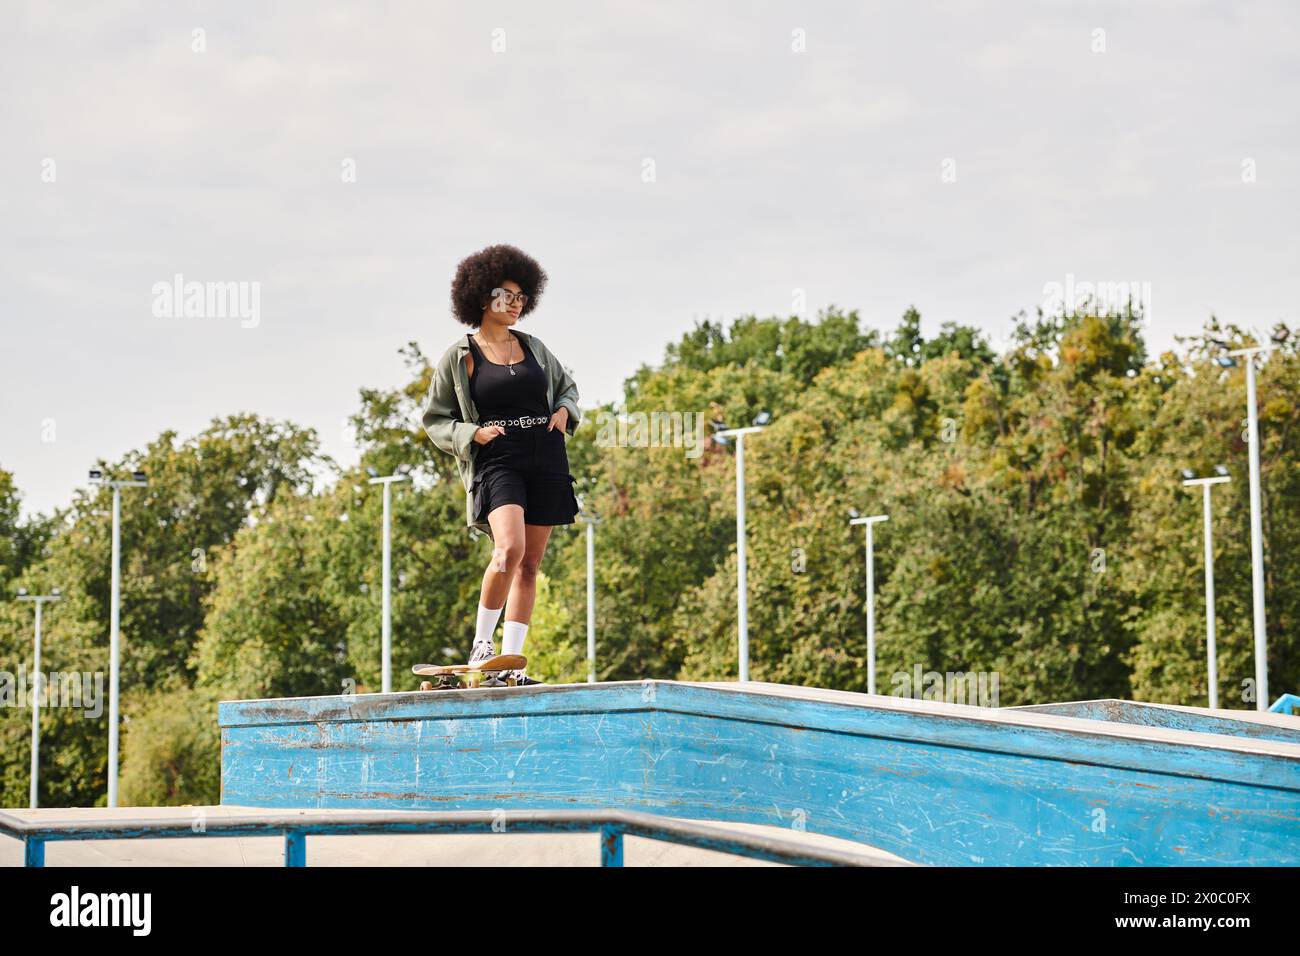 An African American woman with curly hair confidently stands on top of a skateboard ramp in an outdoor skate park. Stock Photo